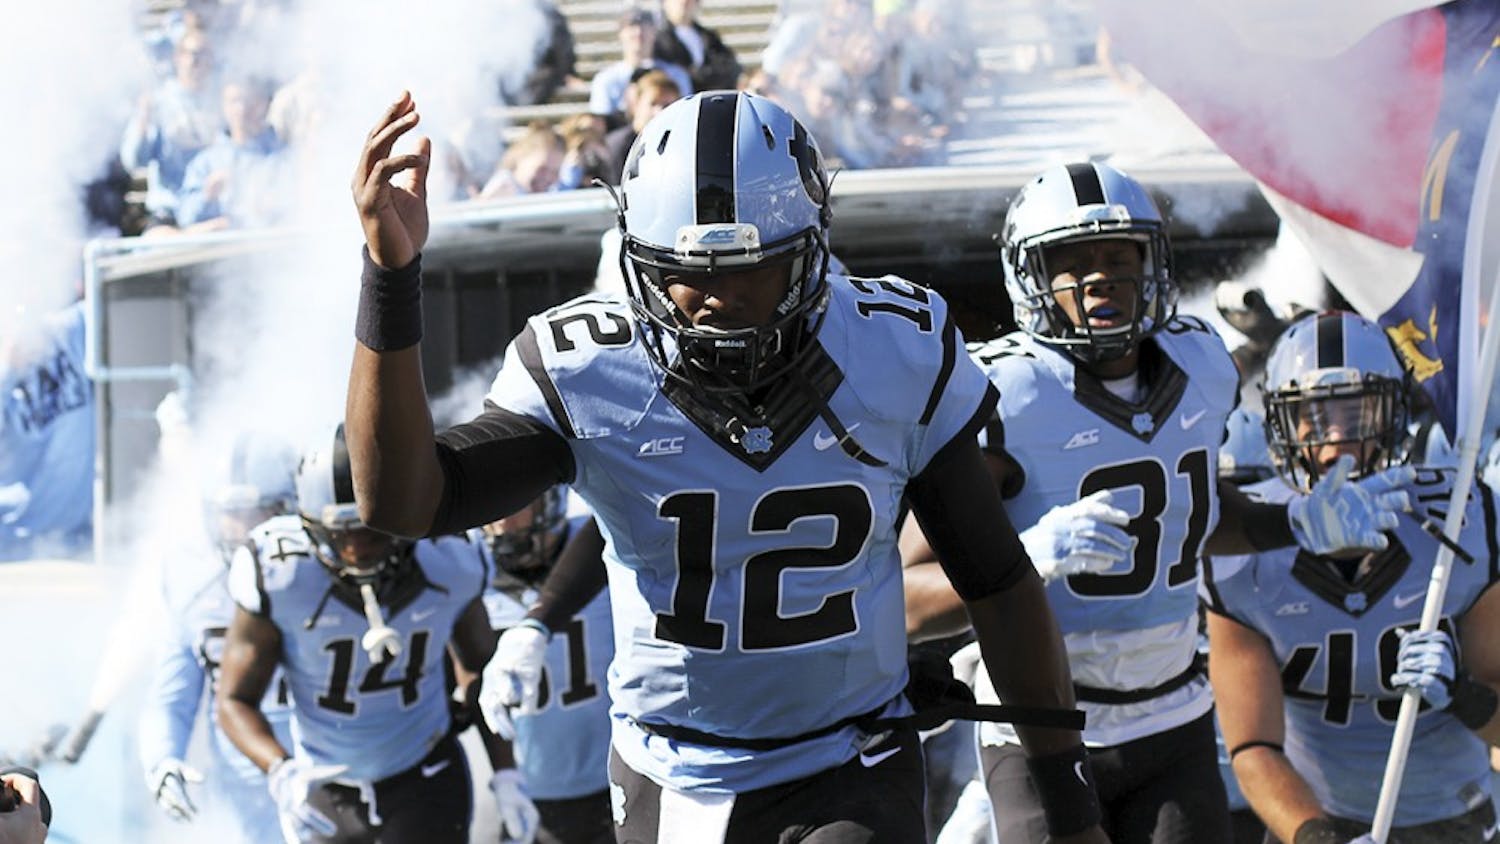 Marquise Williams had a career-high three rushing touchdowns against Pittsburgh Saturday. He also threw for a score in the Tar Heels’ 40-35 victory.